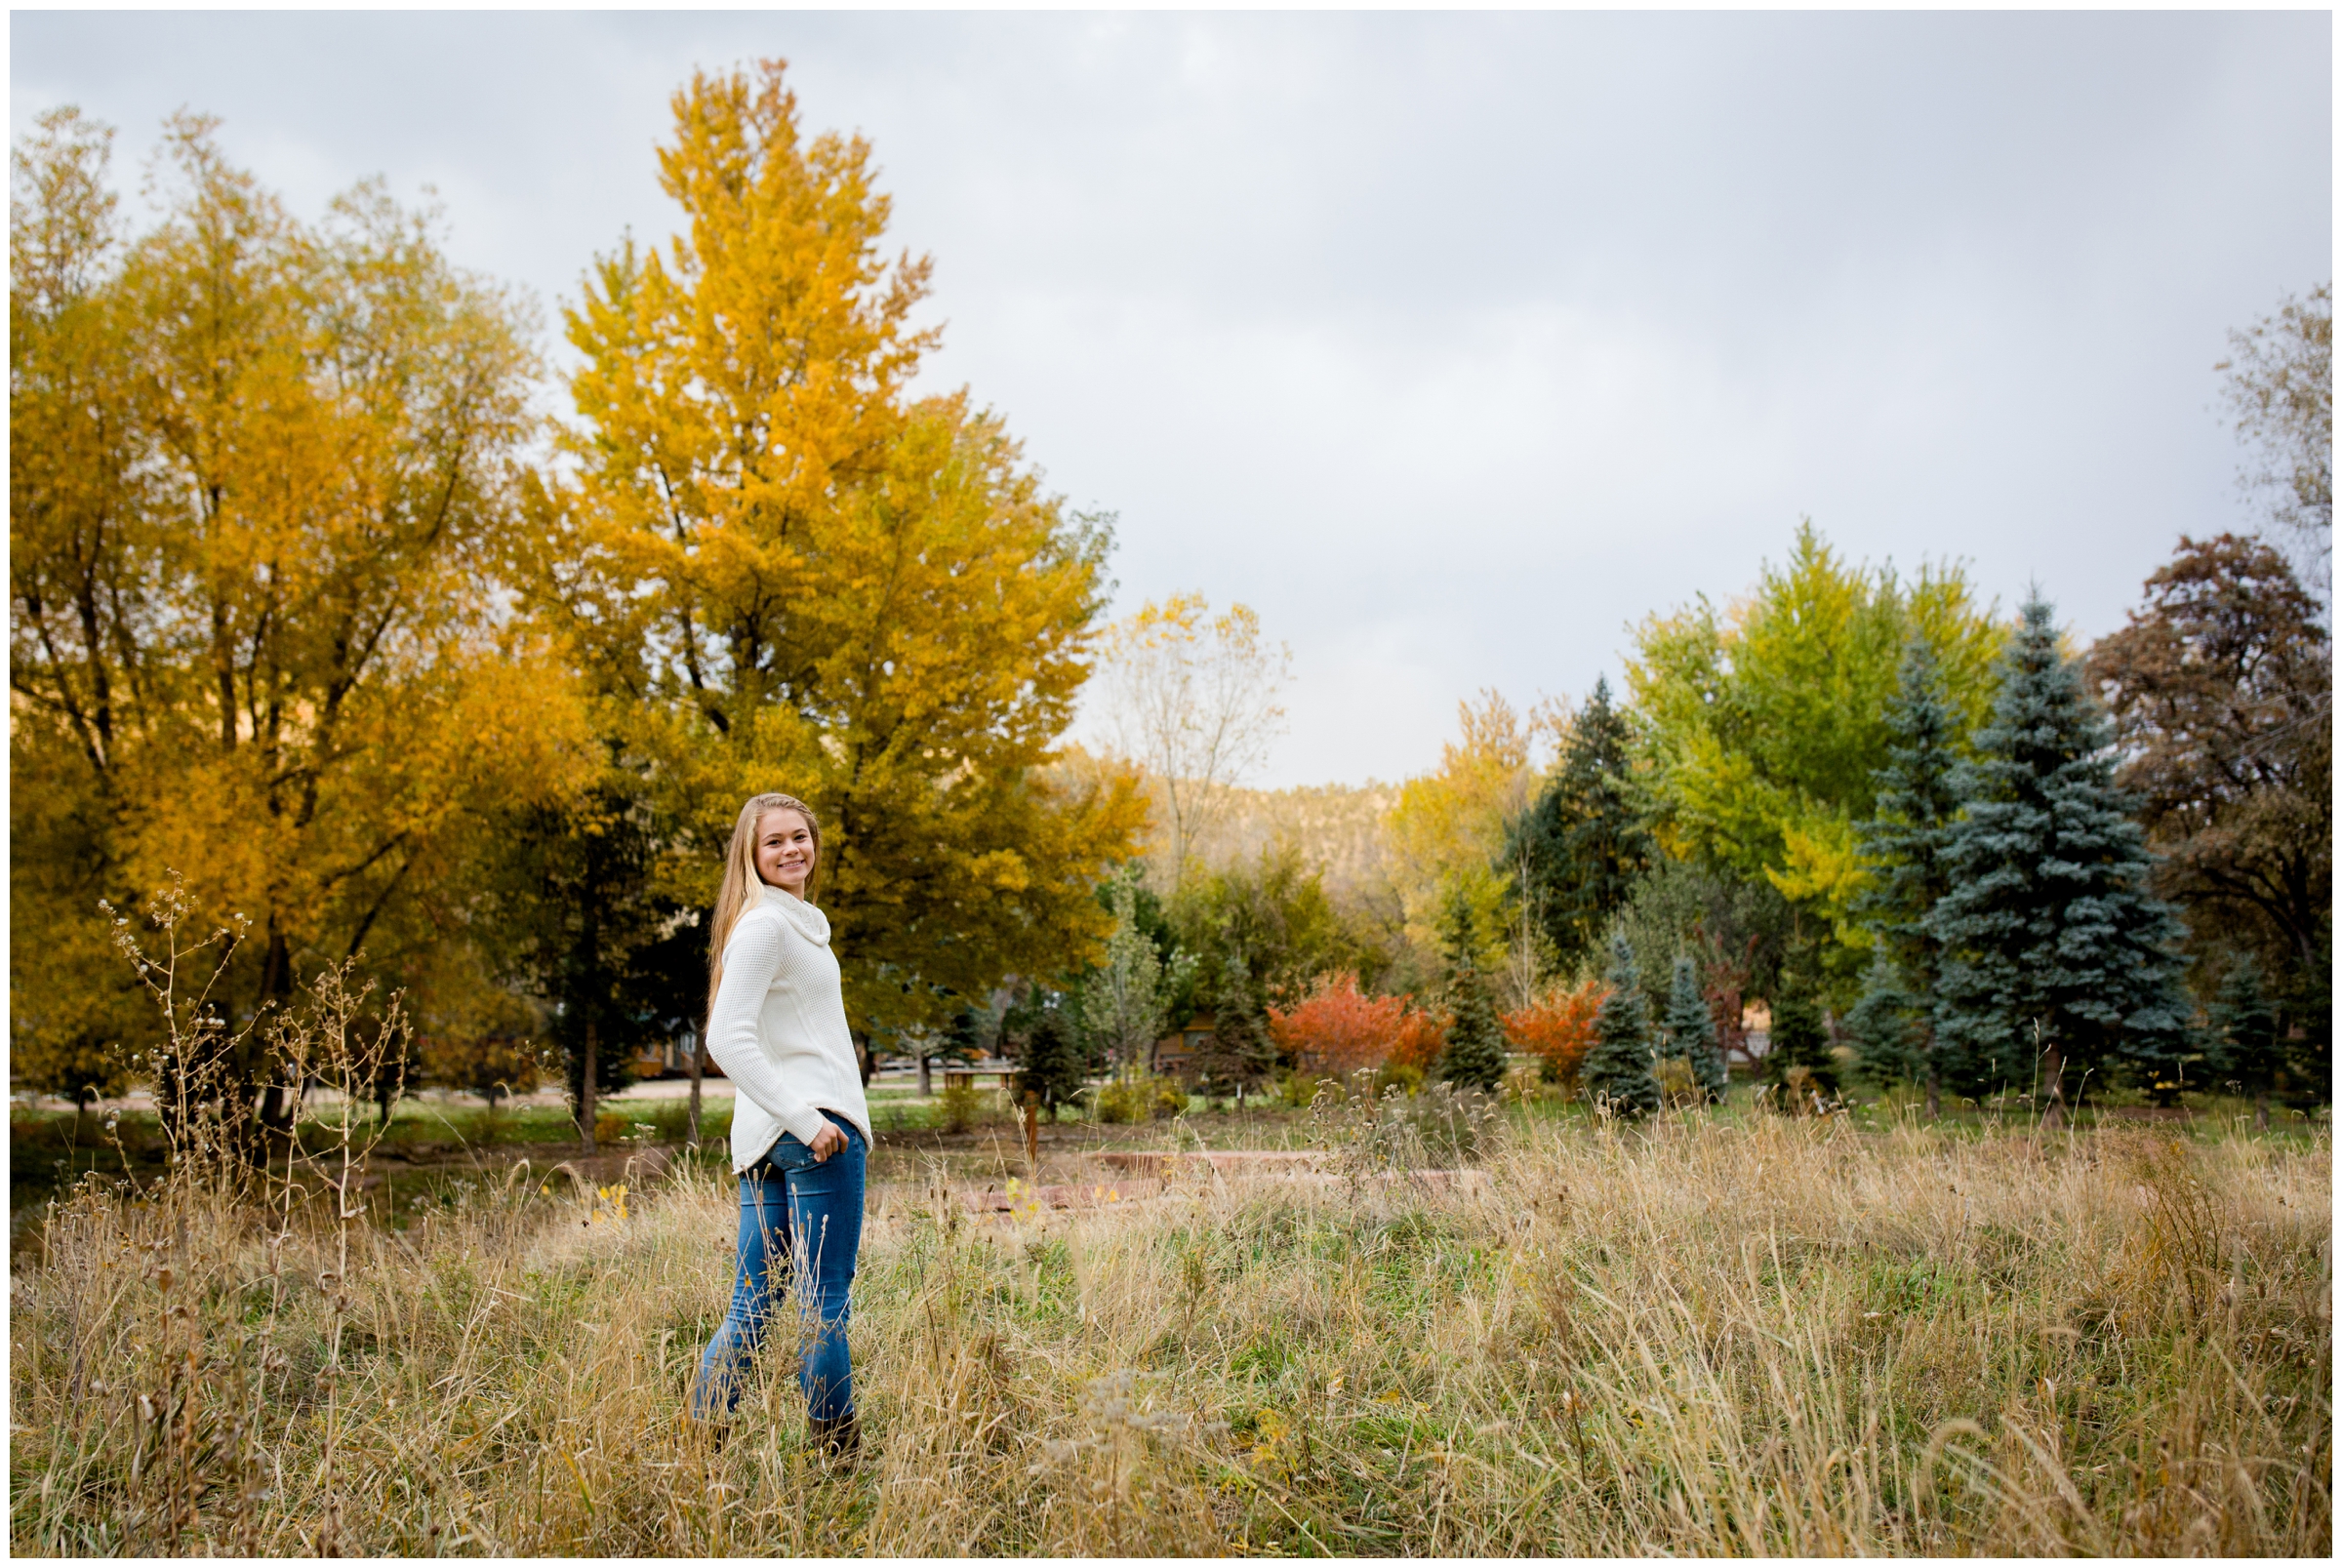 teen standing in field with colorful fall foliage in background in Lyons Colorado 